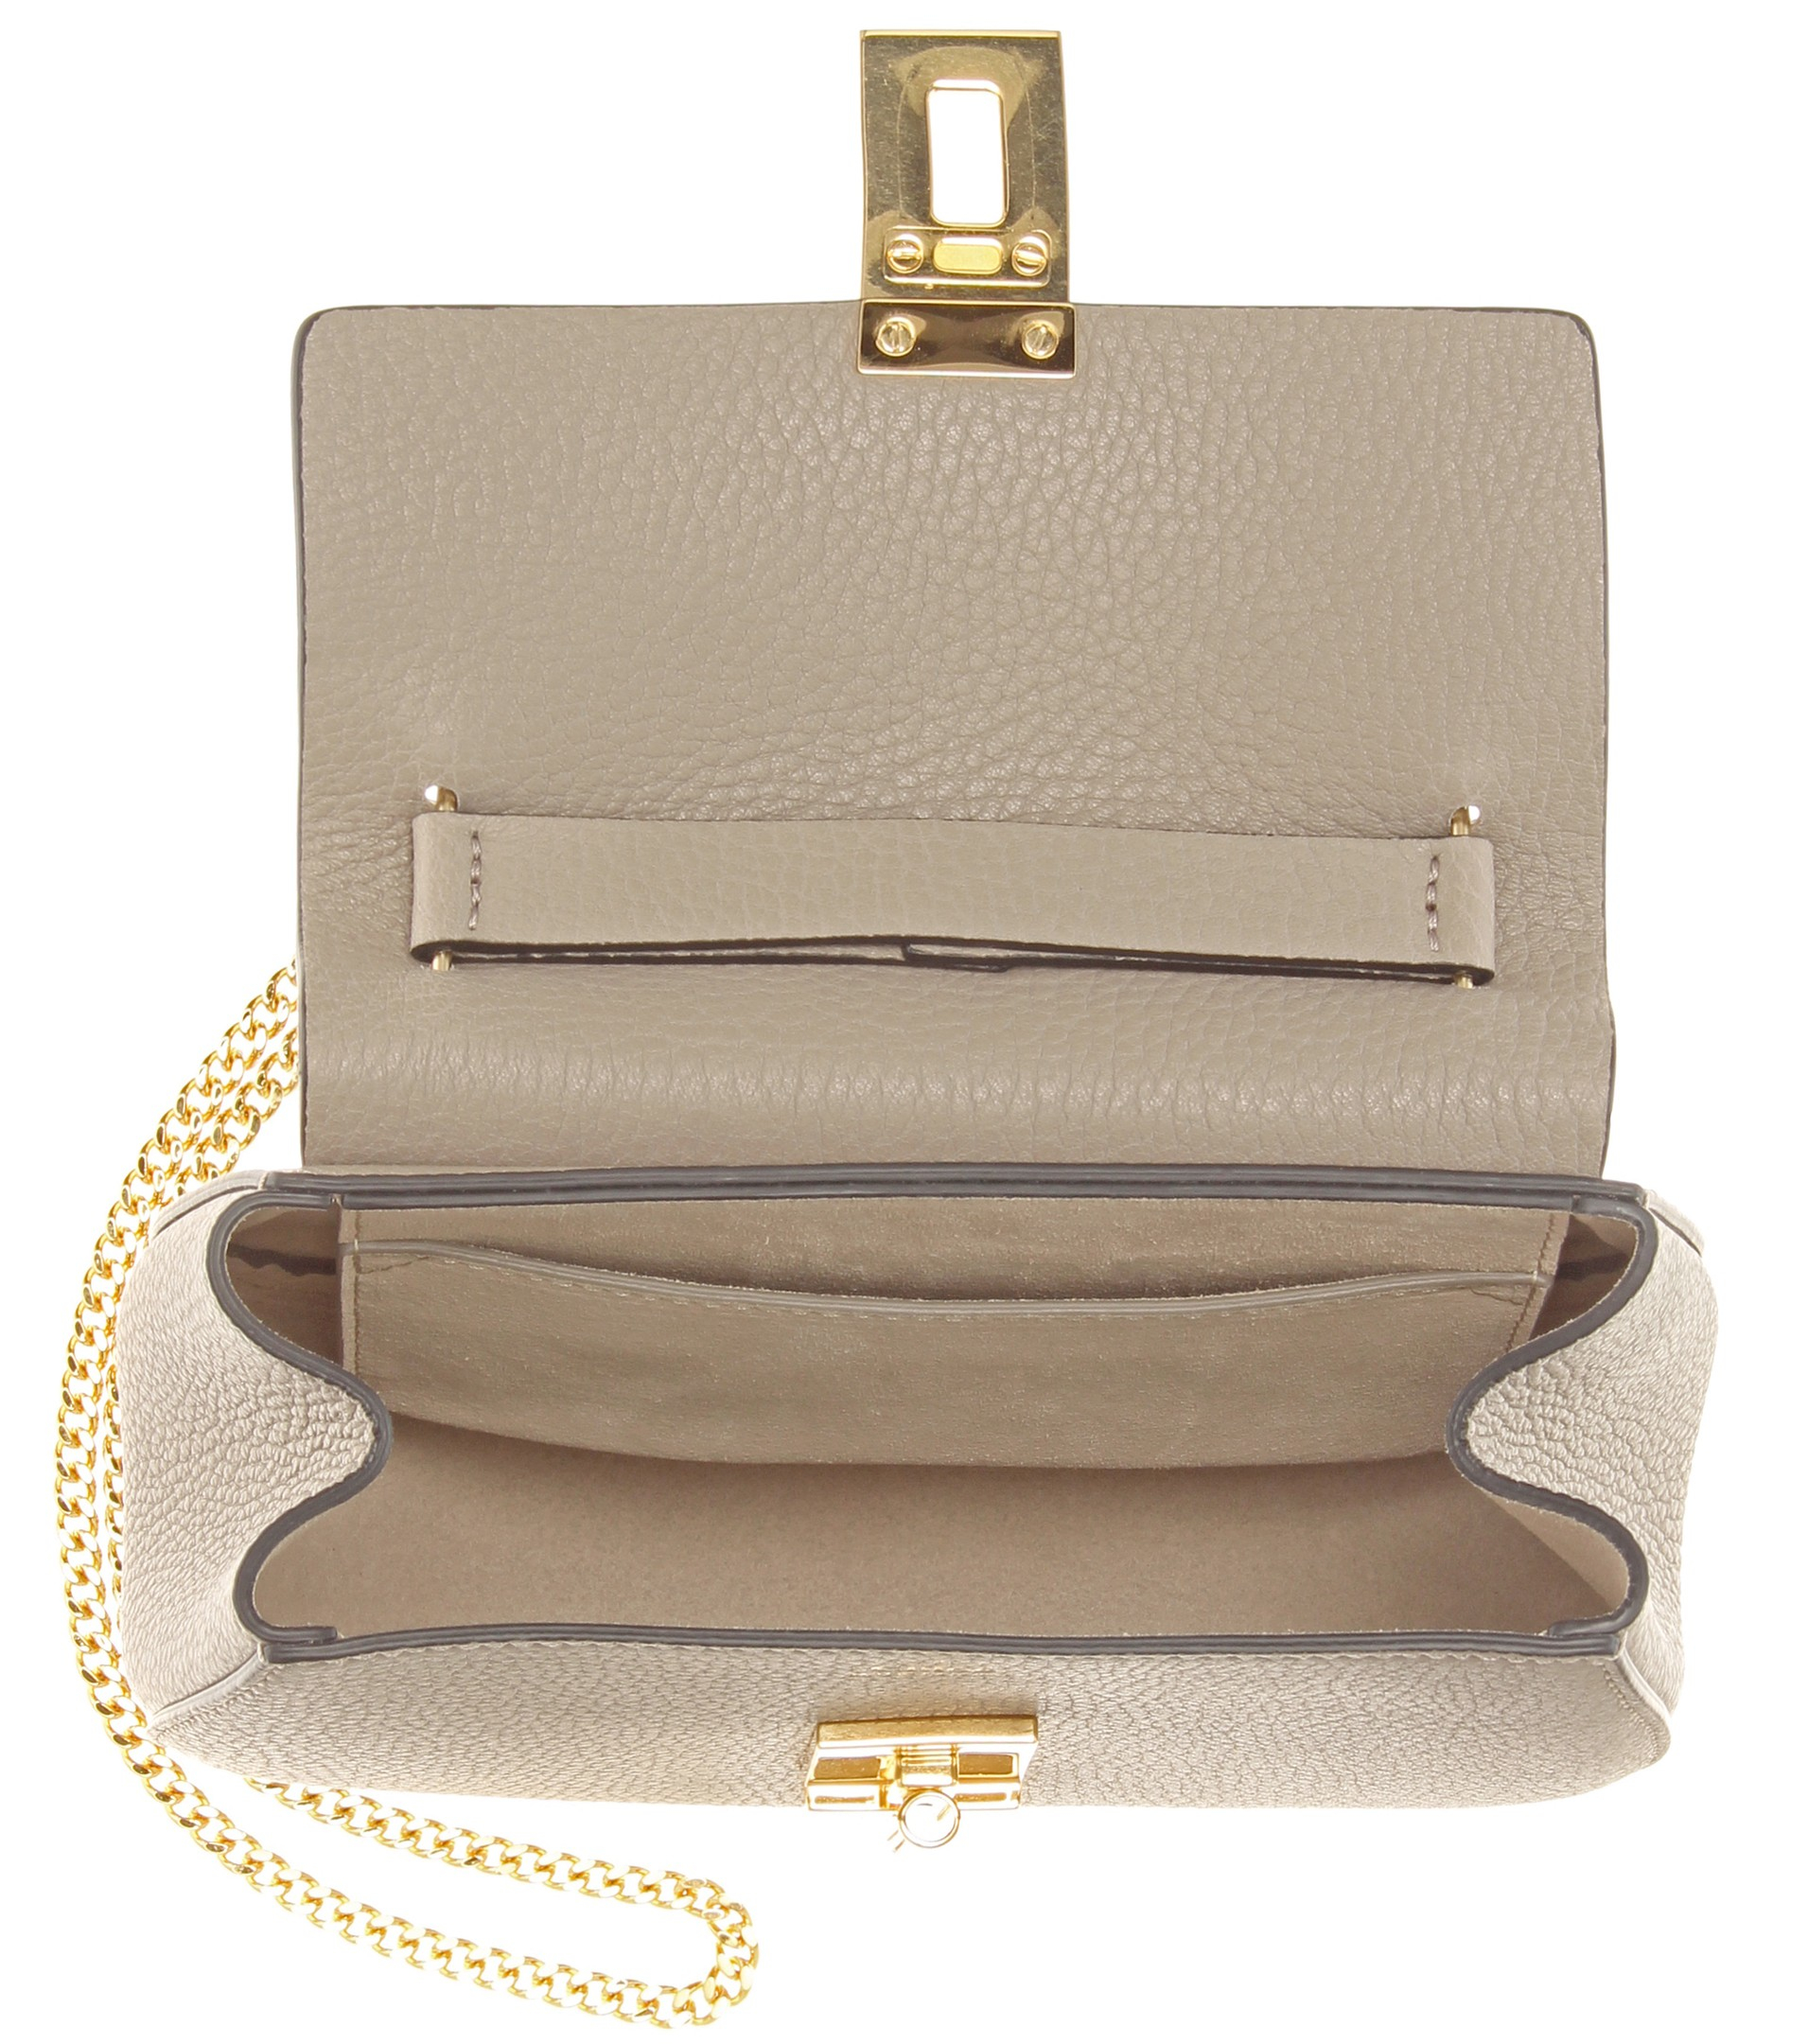 knock off chloe bag - hudson mini bag in smooth calfskin with studded fold leather